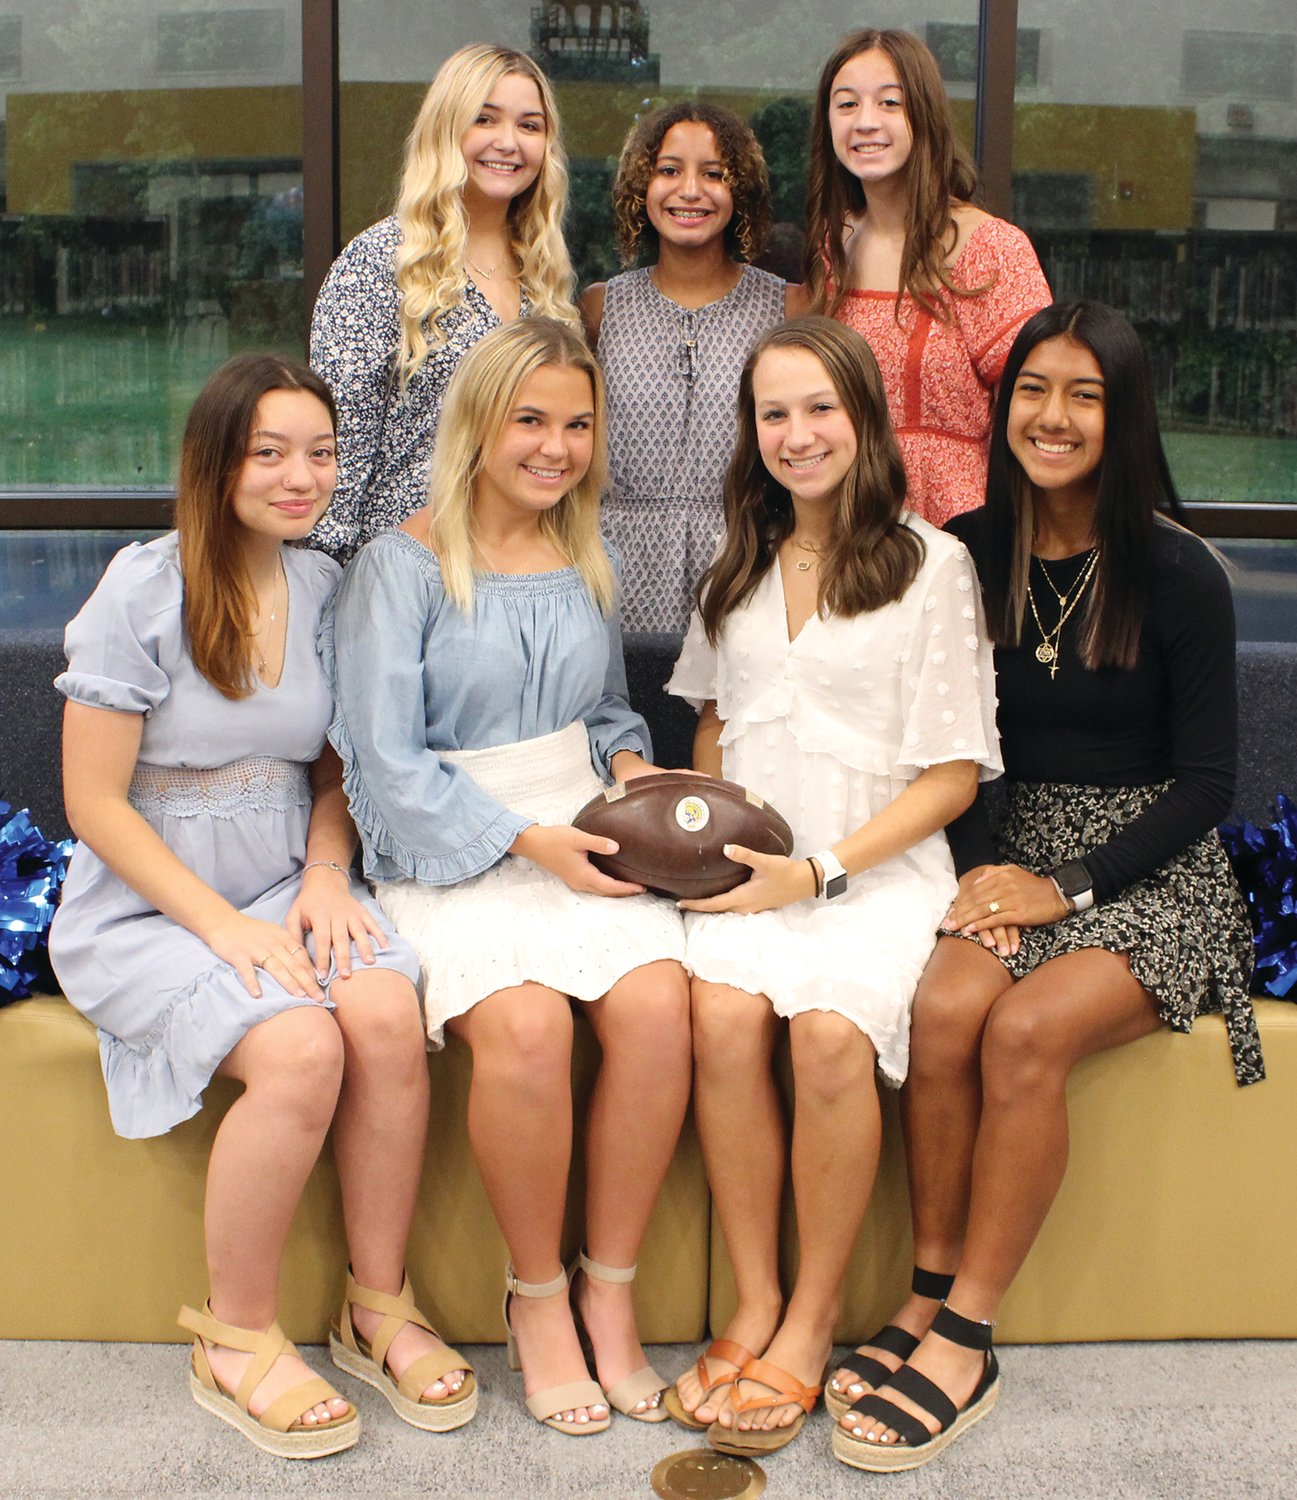 Crawfordsville High School 2021 Homecoming queen candidates and attendants are, from left, front row, senior queen candidates, Danna Schu, Lilly Klingbeil, Reese Minnette and Hannia Hernández; and back row, junior attendant Maggie Latona, freshman attendant Caedence Brown and sophomore attendant Emily Powell. The queen will be crowned today during halftime of the football game.